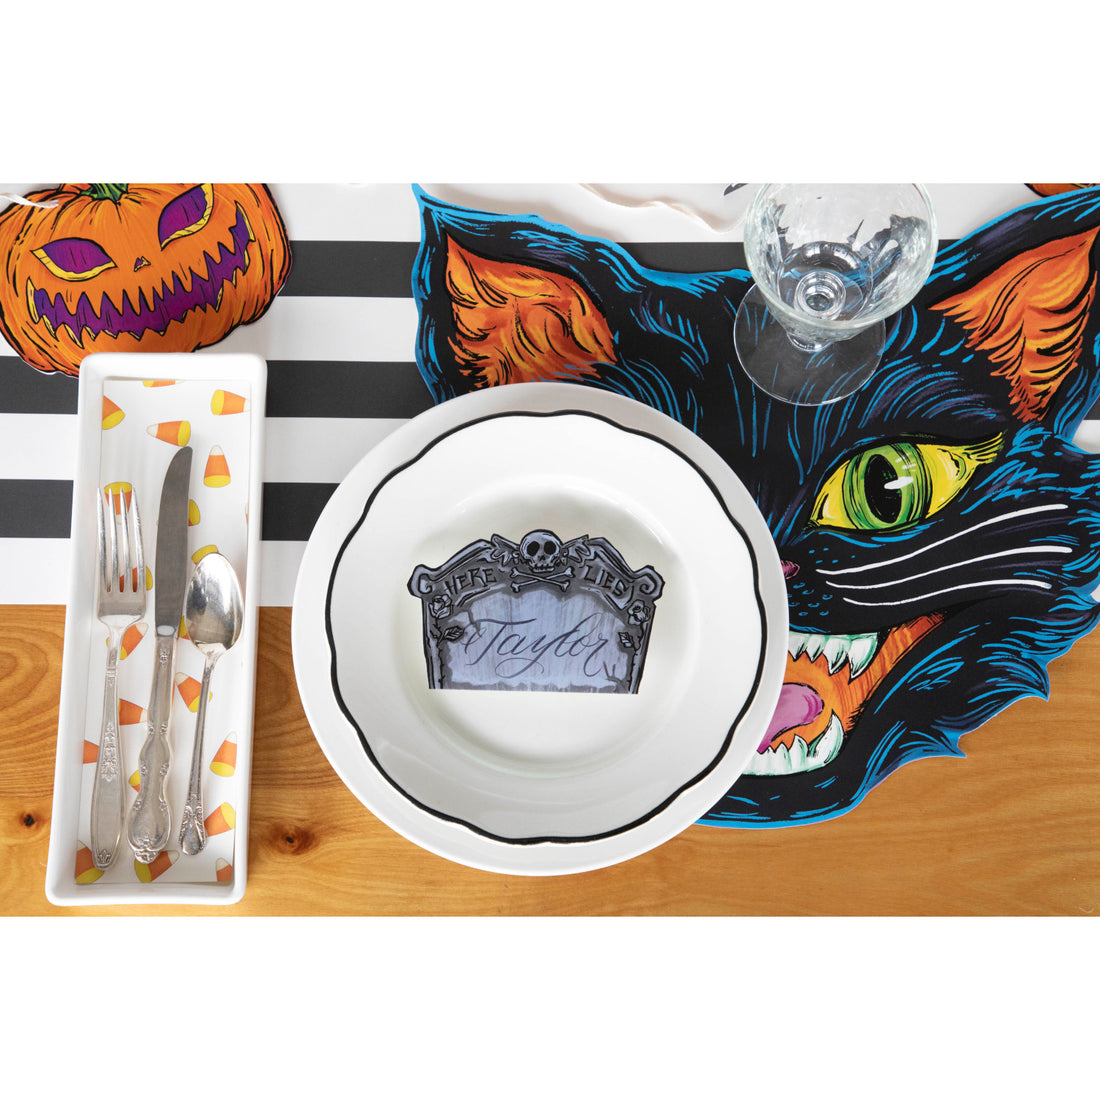 Top-down view of a spooky Halloween place setting featuring a Tombstone Place Card labeled &quot;Taylor&quot; resting on the plate.